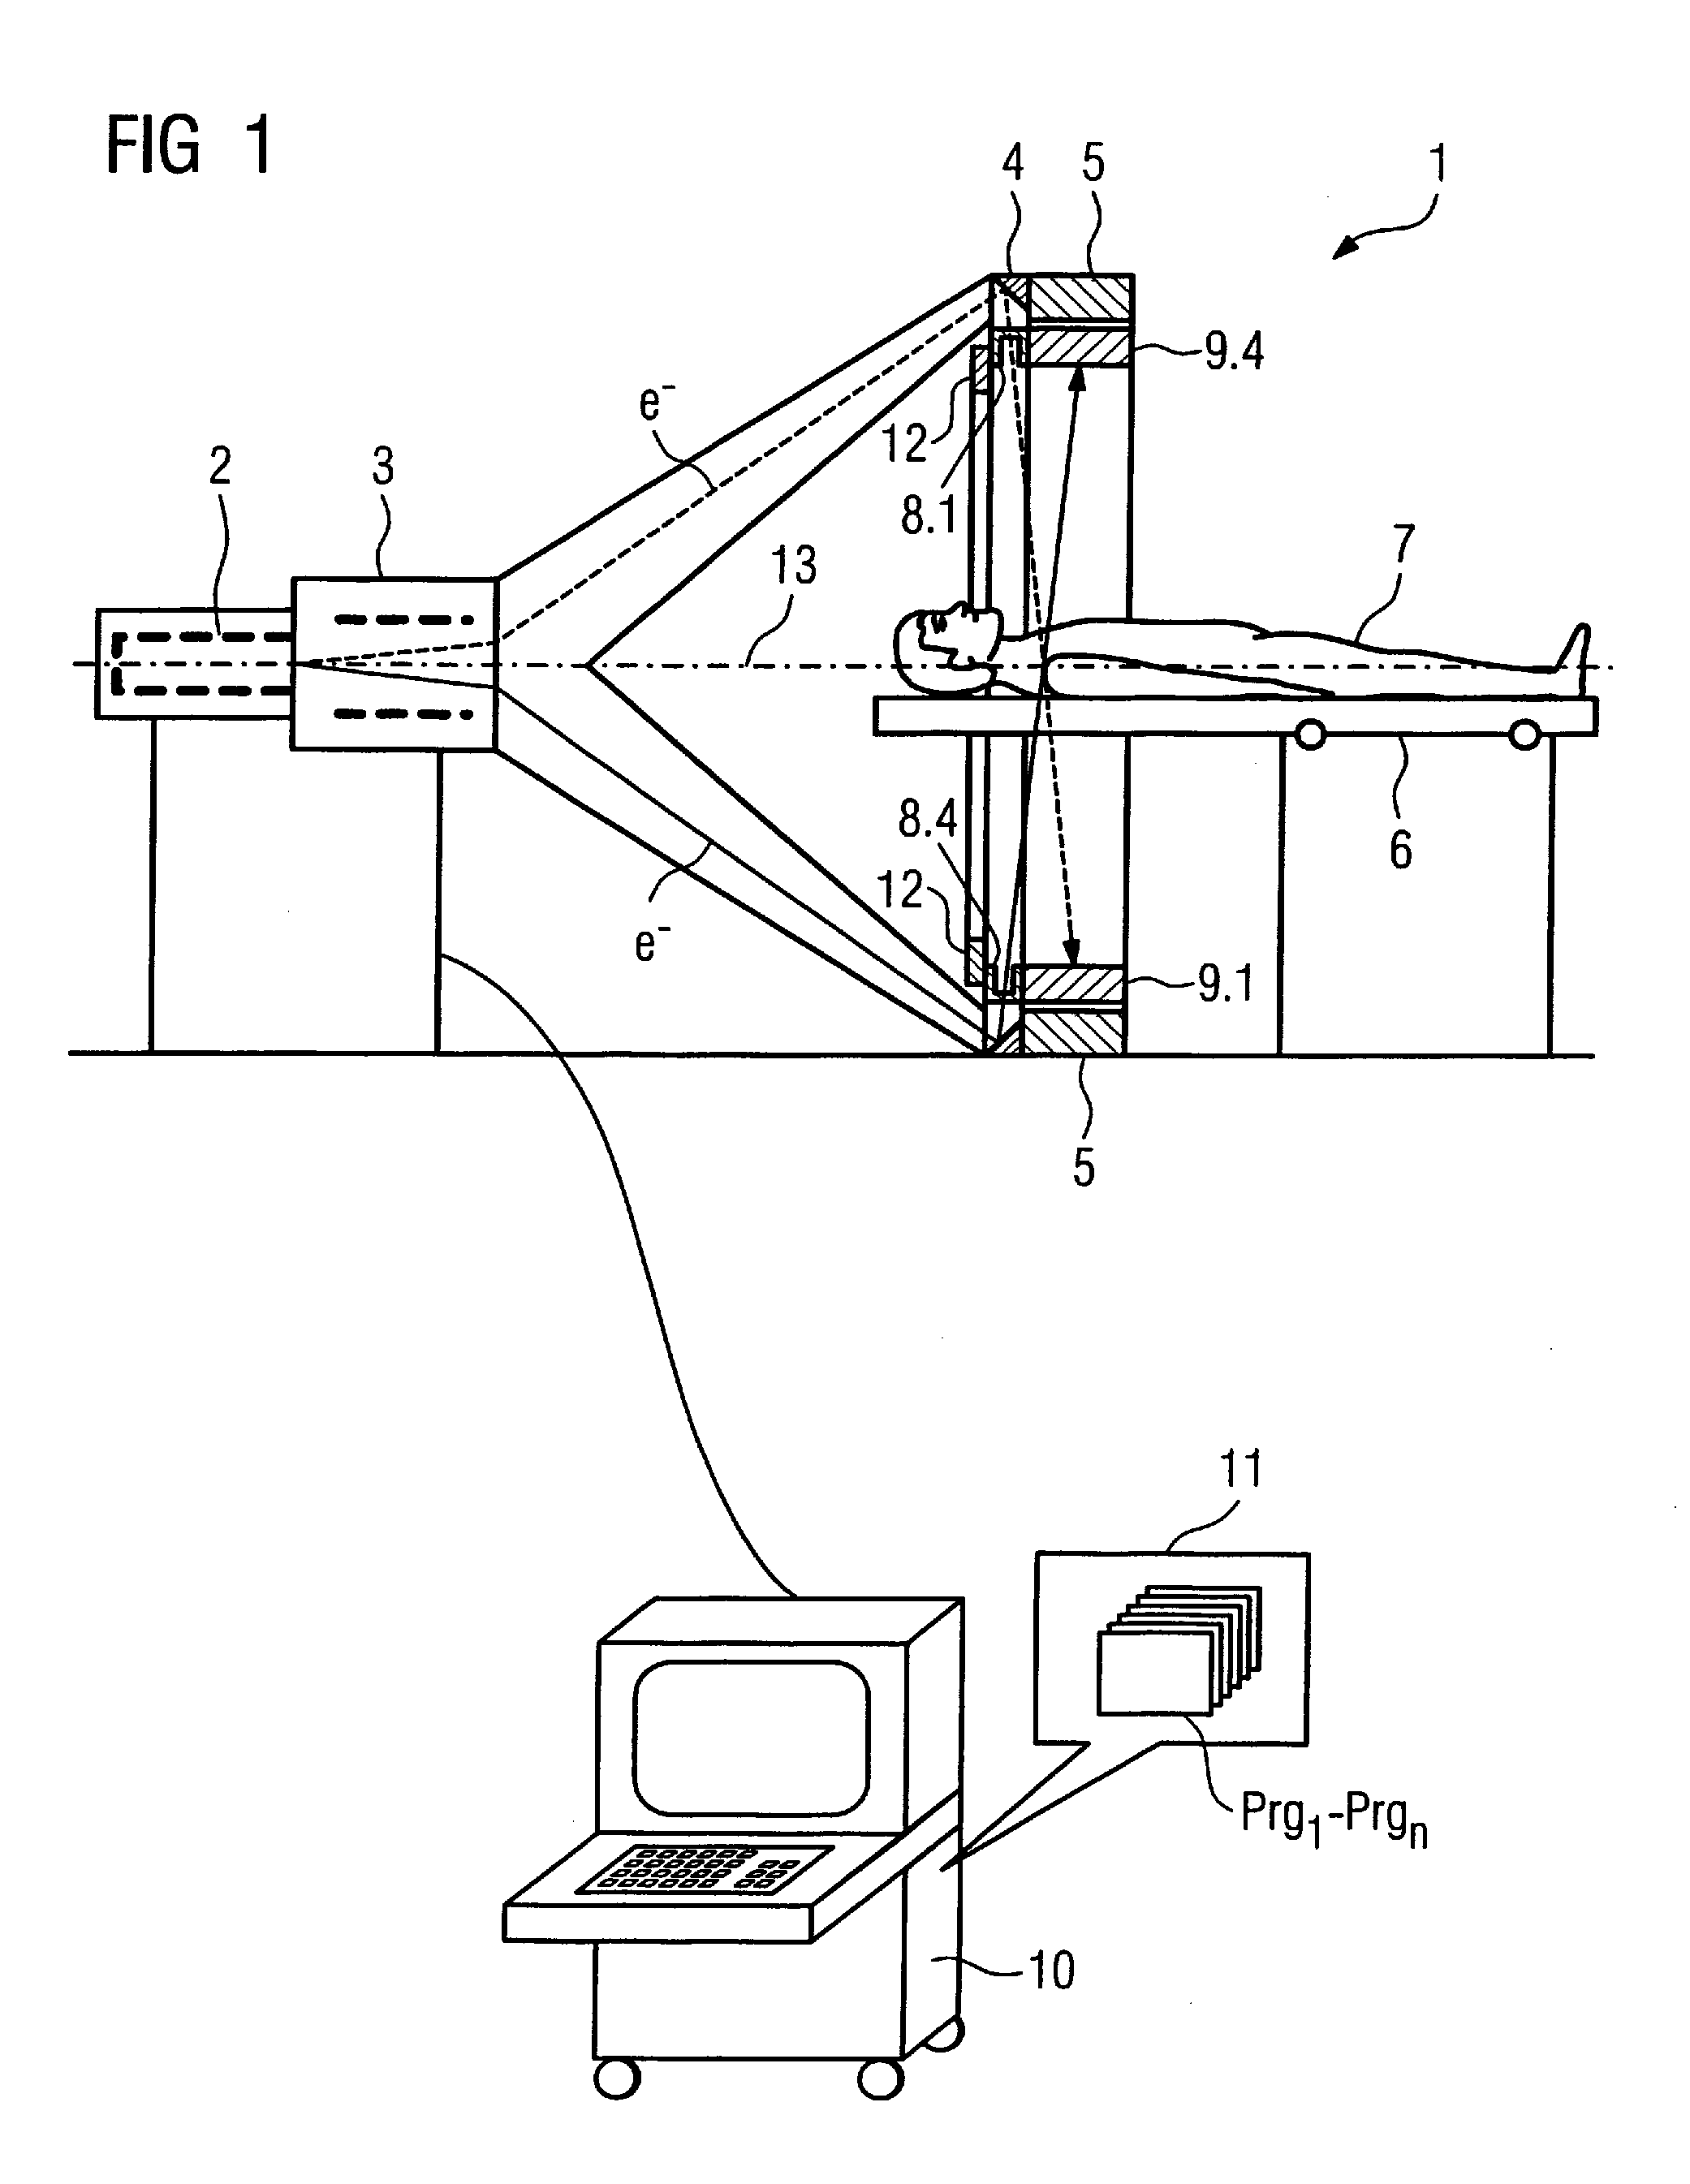 Fifth generation x-ray computed tomography system and operating method